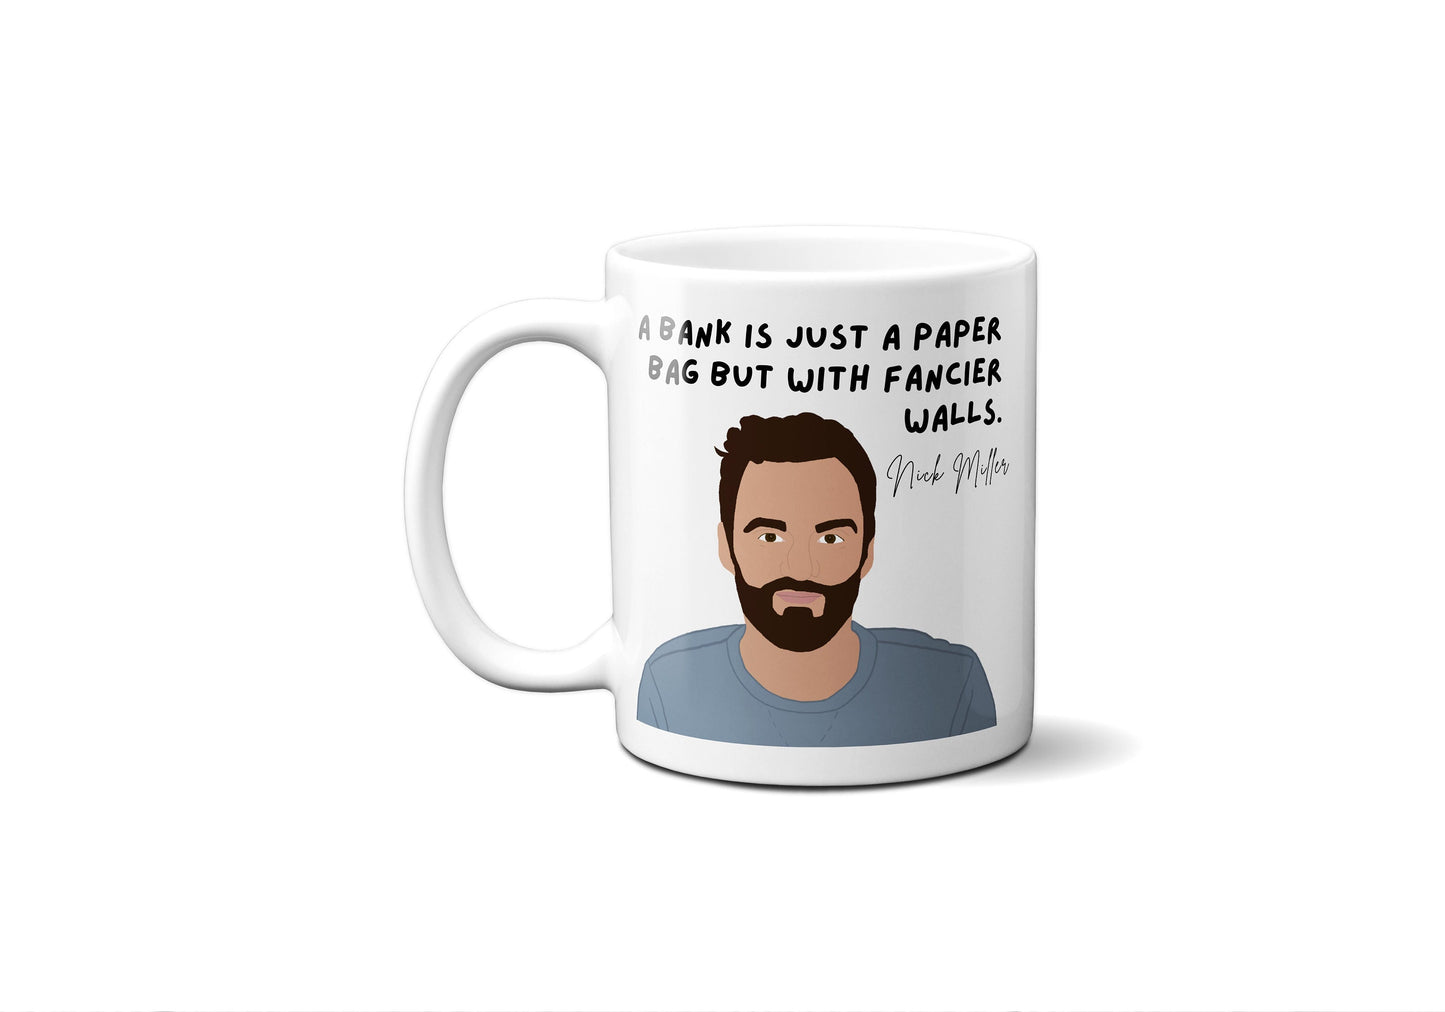 Nick Miller Quotes | New Girl Mug | A Bank is just a paper bag with fancier walls